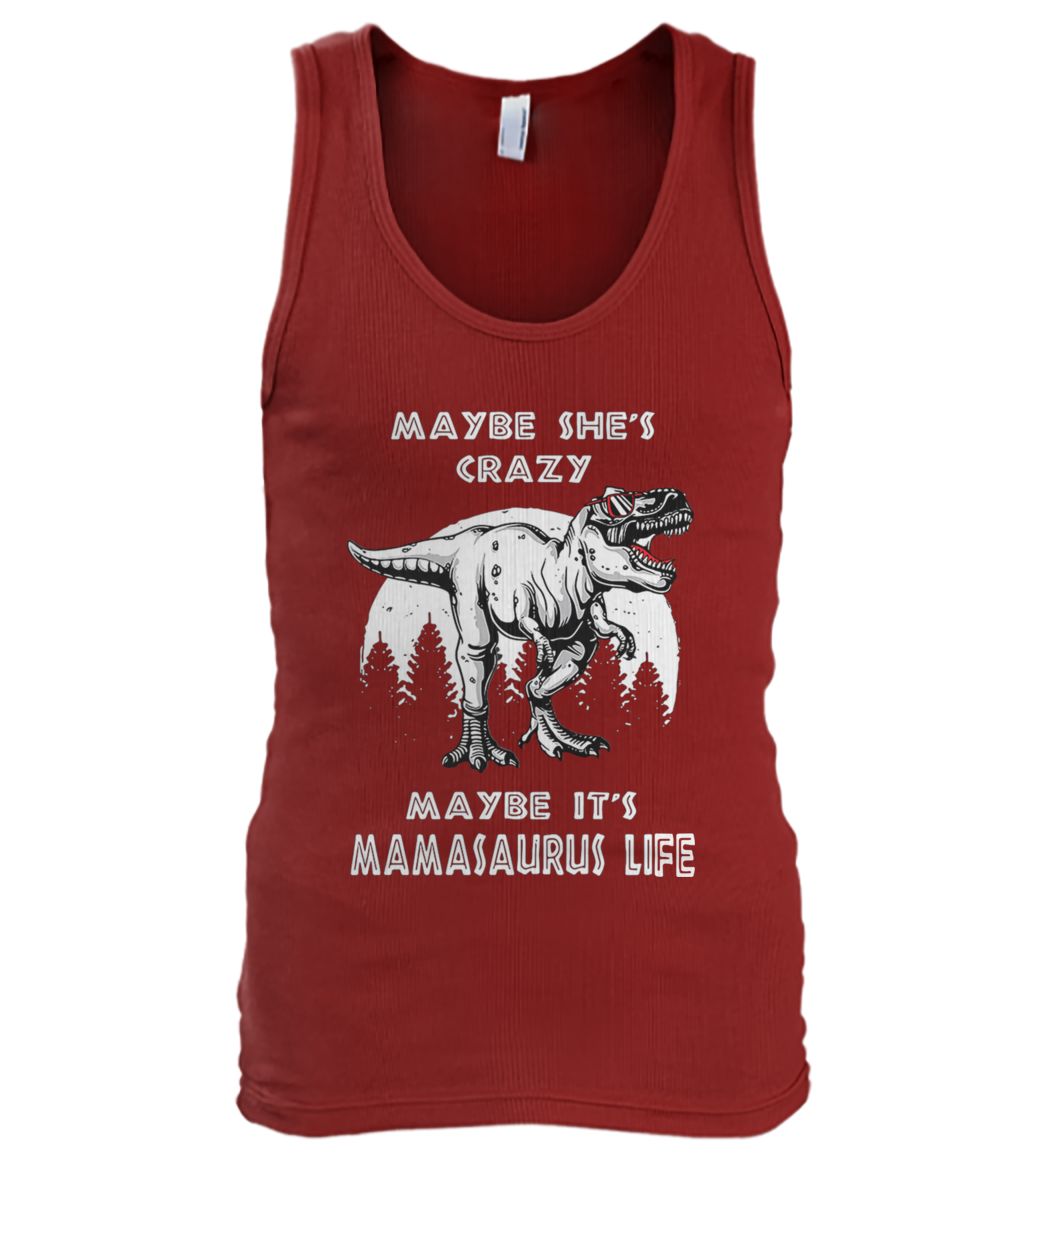 Maybe she's crazy maybe it's mamasaurus life men's tank top